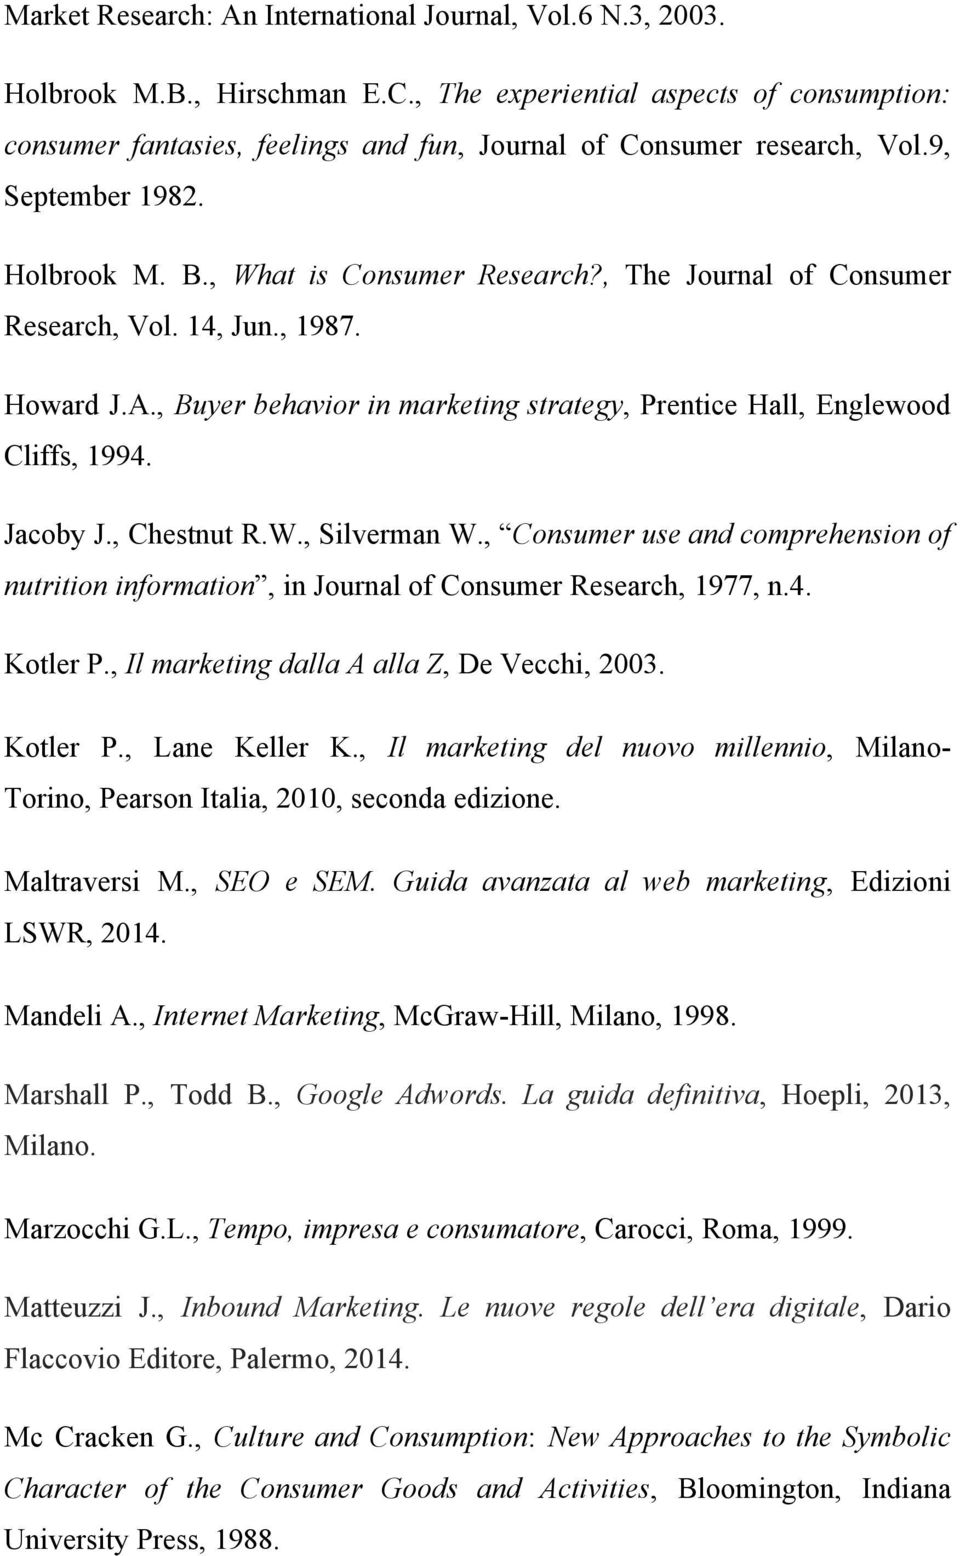 , The Journal of Consumer Research, Vol. 14, Jun., 1987. Howard J.A., Buyer behavior in marketing strategy, Prentice Hall, Englewood Cliffs, 1994. Jacoby J., Chestnut R.W., Silverman W.